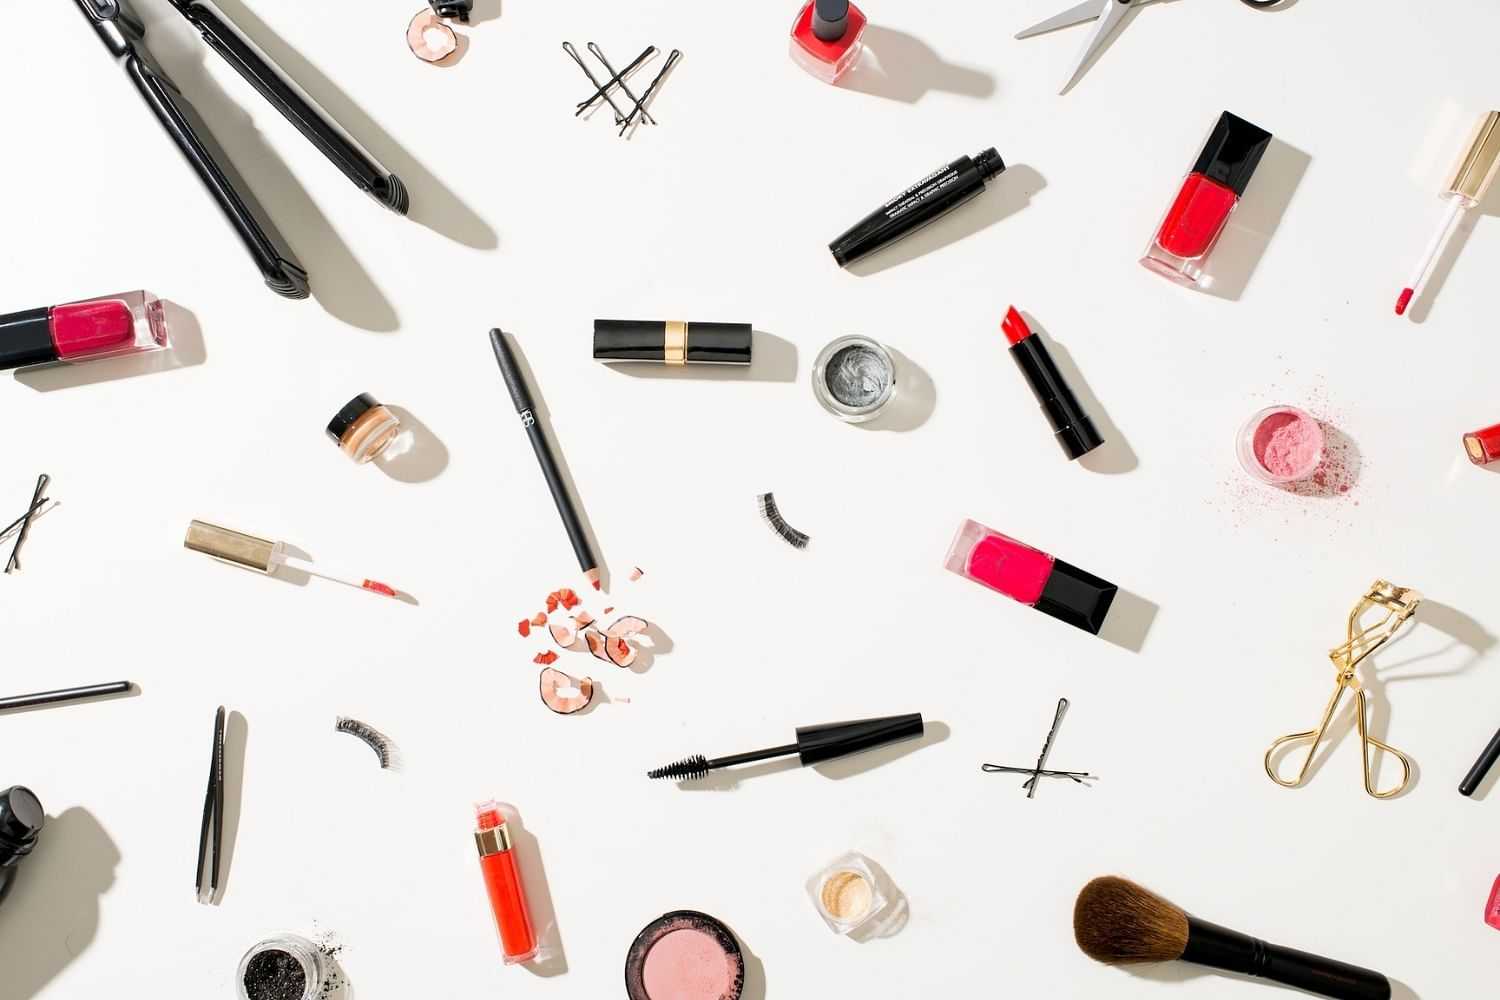 Assorted makeup products scattered on a white background.